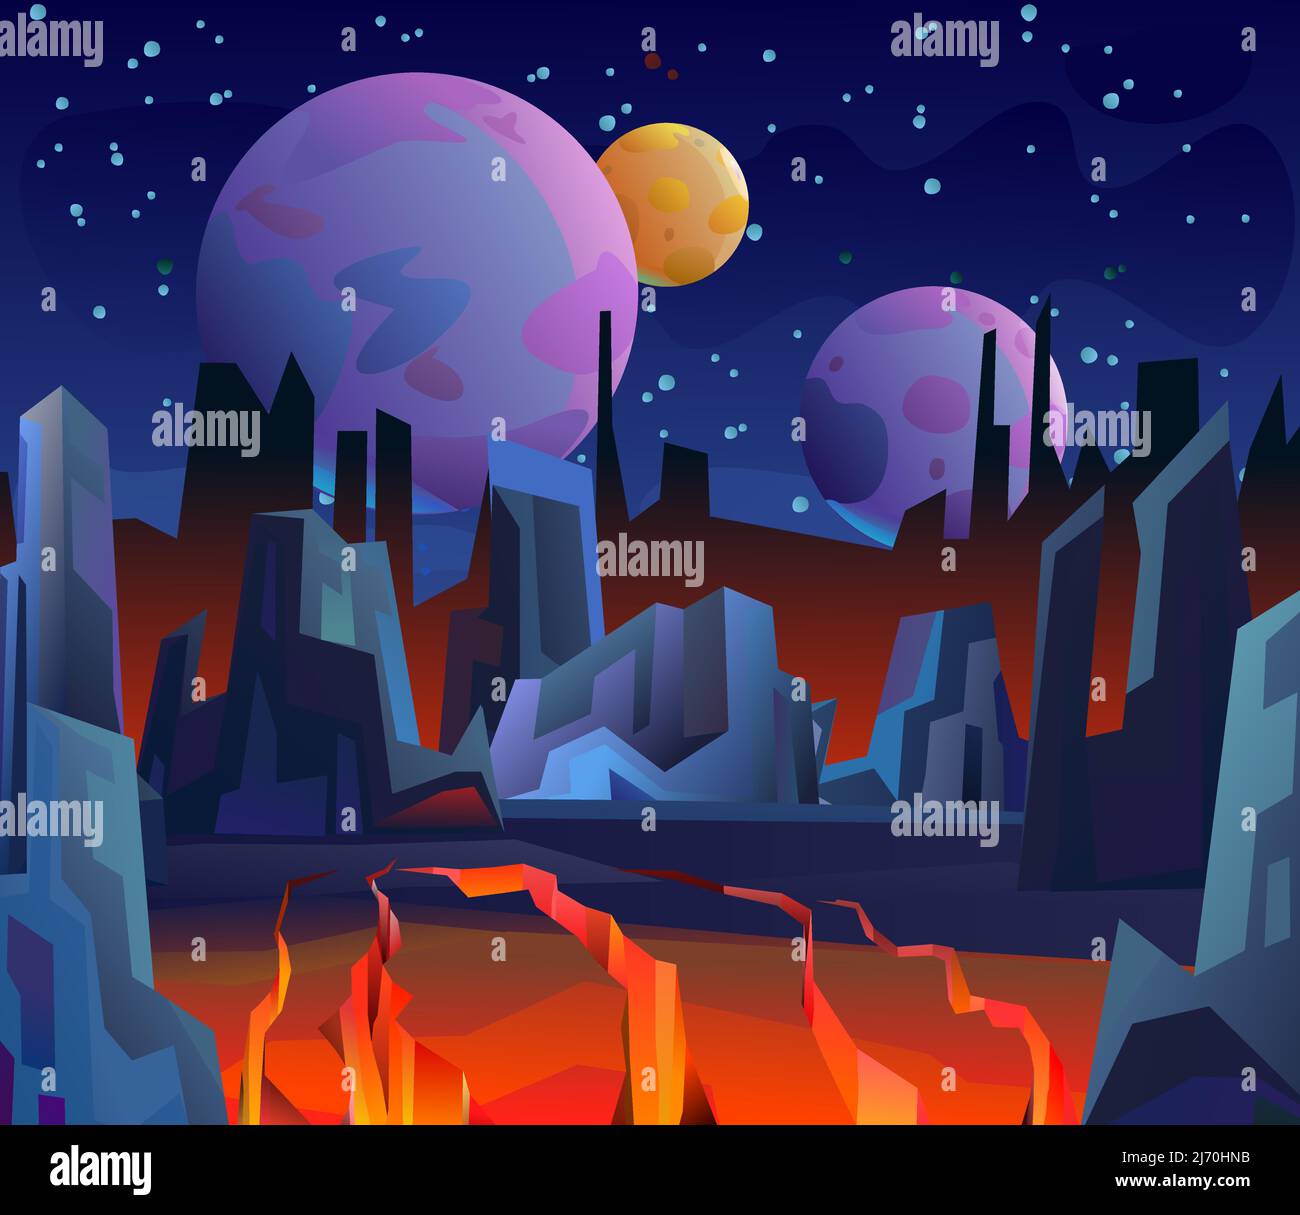 unexplored planets. Rocks cliffs landscape. Night scenery in mountains. Cracked earth cracked. Lava and magma. Starry sky. Volcanic earthquake. Cartoo Stock Vector